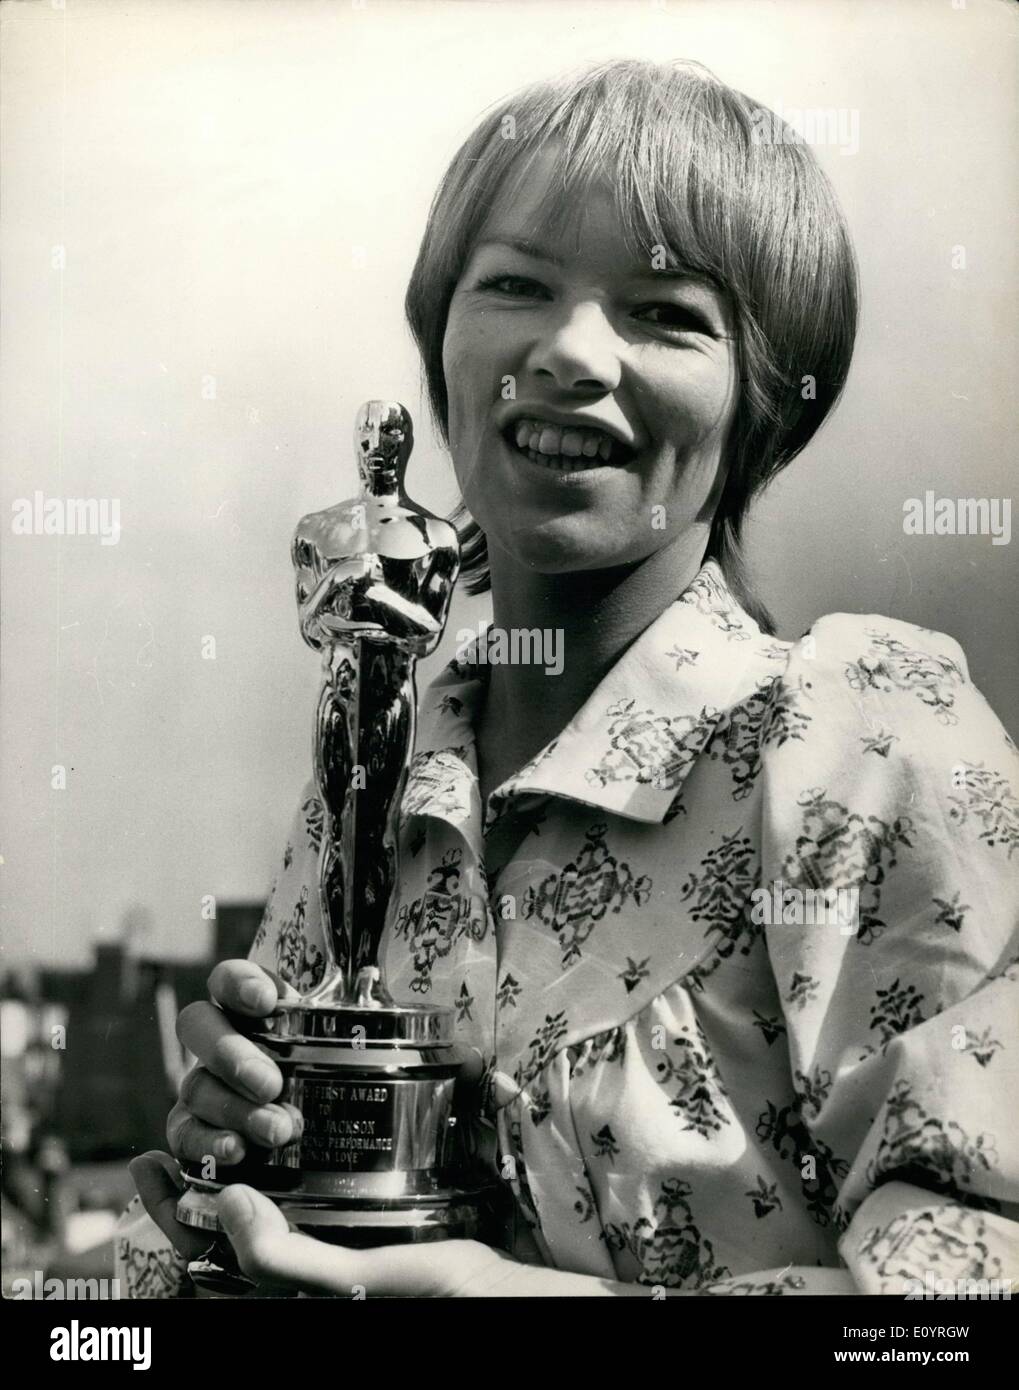 Apr. 04, 1971 - Hal B. Wallis, a member of the board of governors of the Motion Picture Academy of Arts and Sciences, today presented to Glenda Jackson on behalf of the Academy the Oscar she was awarded for her performance in ''Woman in Love''. Wallis, who arrived in London over the weekend to begin production on his film : Mary, Queen of Scots'', in which Miss Jackson co stars with Vanessa Redgrave, brought the Oscar with him from Hollywood. OPS: A happy Glenda Jackson pictured with her Oscar after the presentation at the Dochester Hotel today. Stock Photo